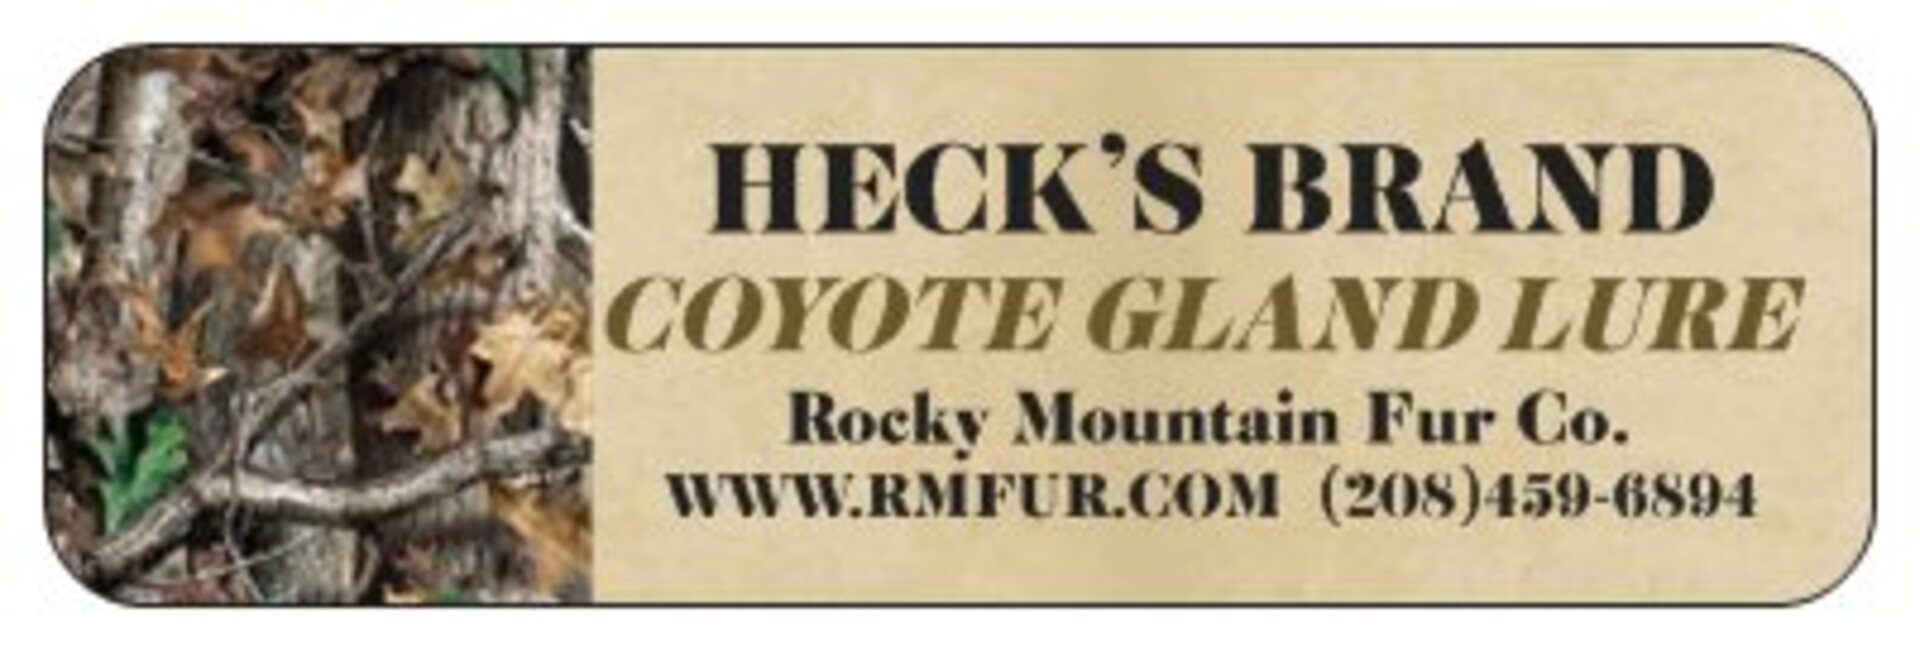 Heck's Coyote Gland Lure